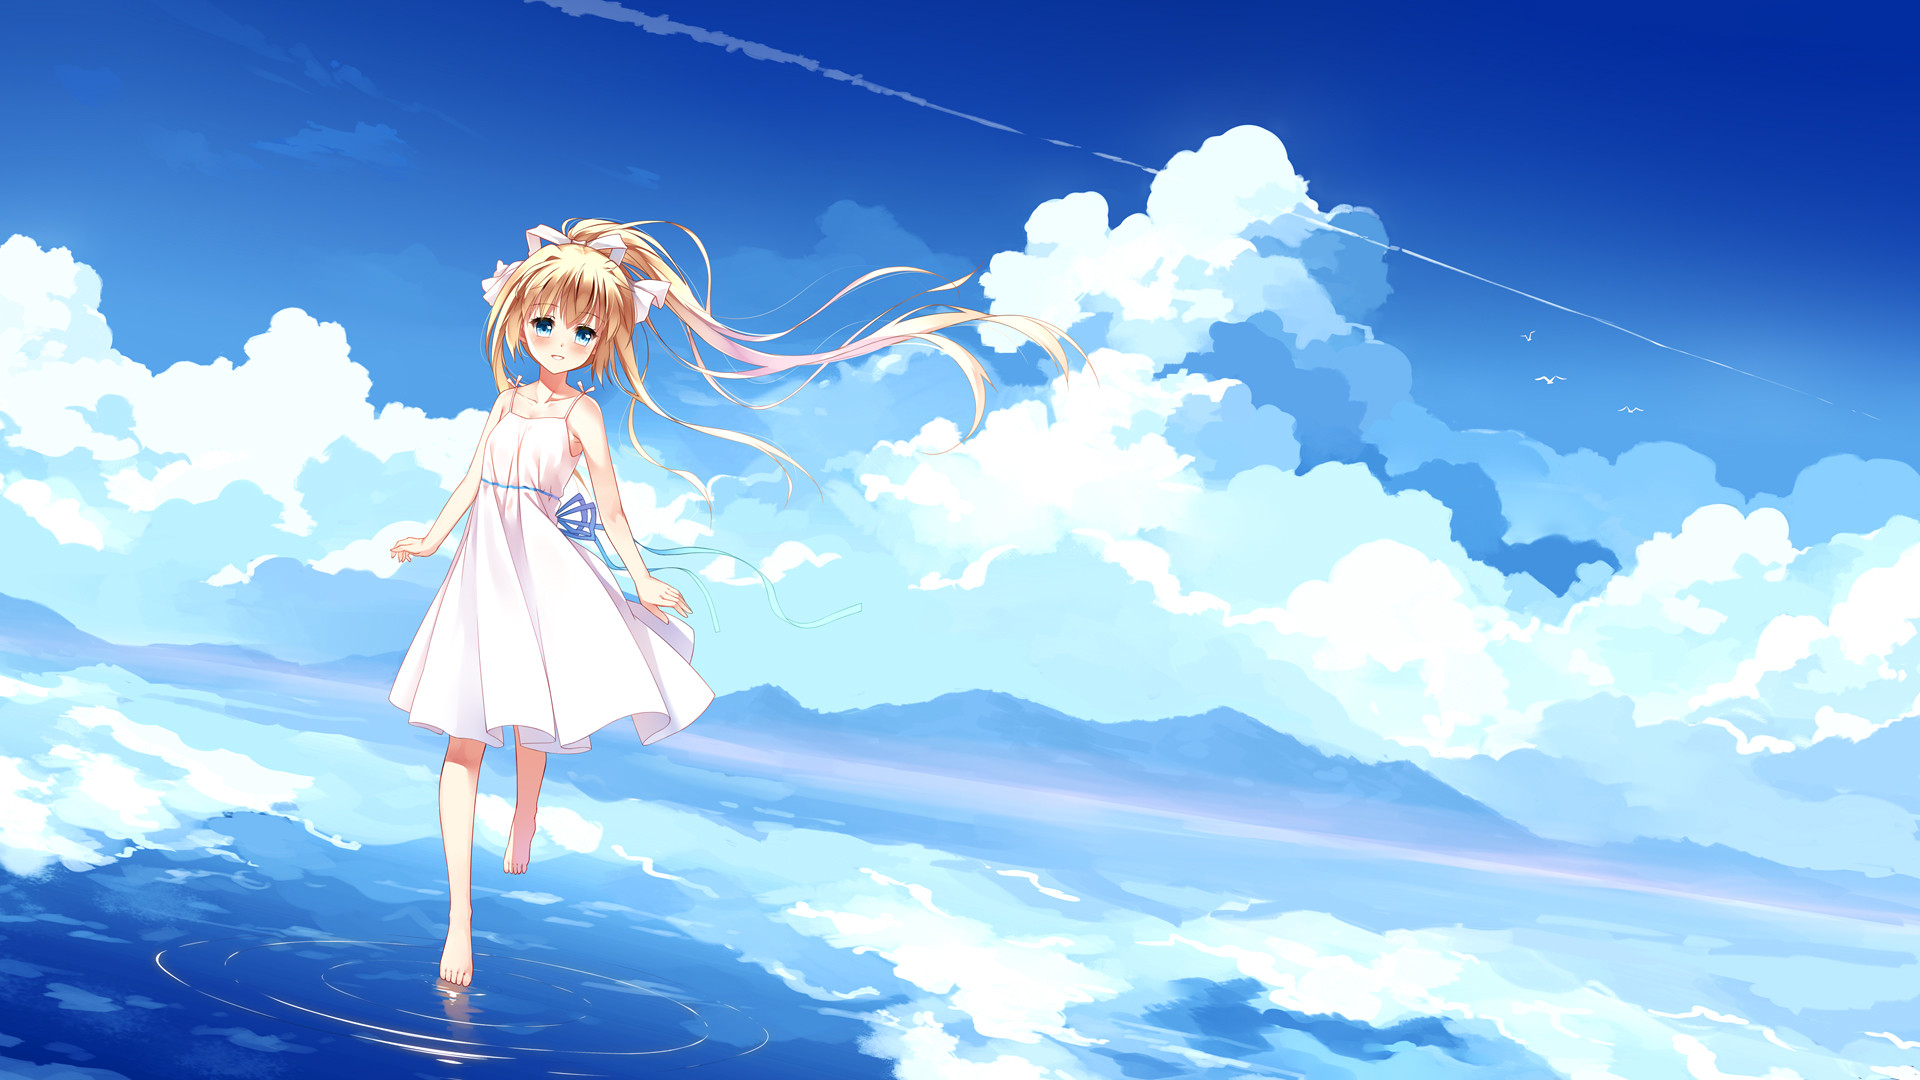 Desktop Wallpaper Walk On Water, Cute Anime Girl, Clouds, Hd Image,  Picture, Background, 041c5b